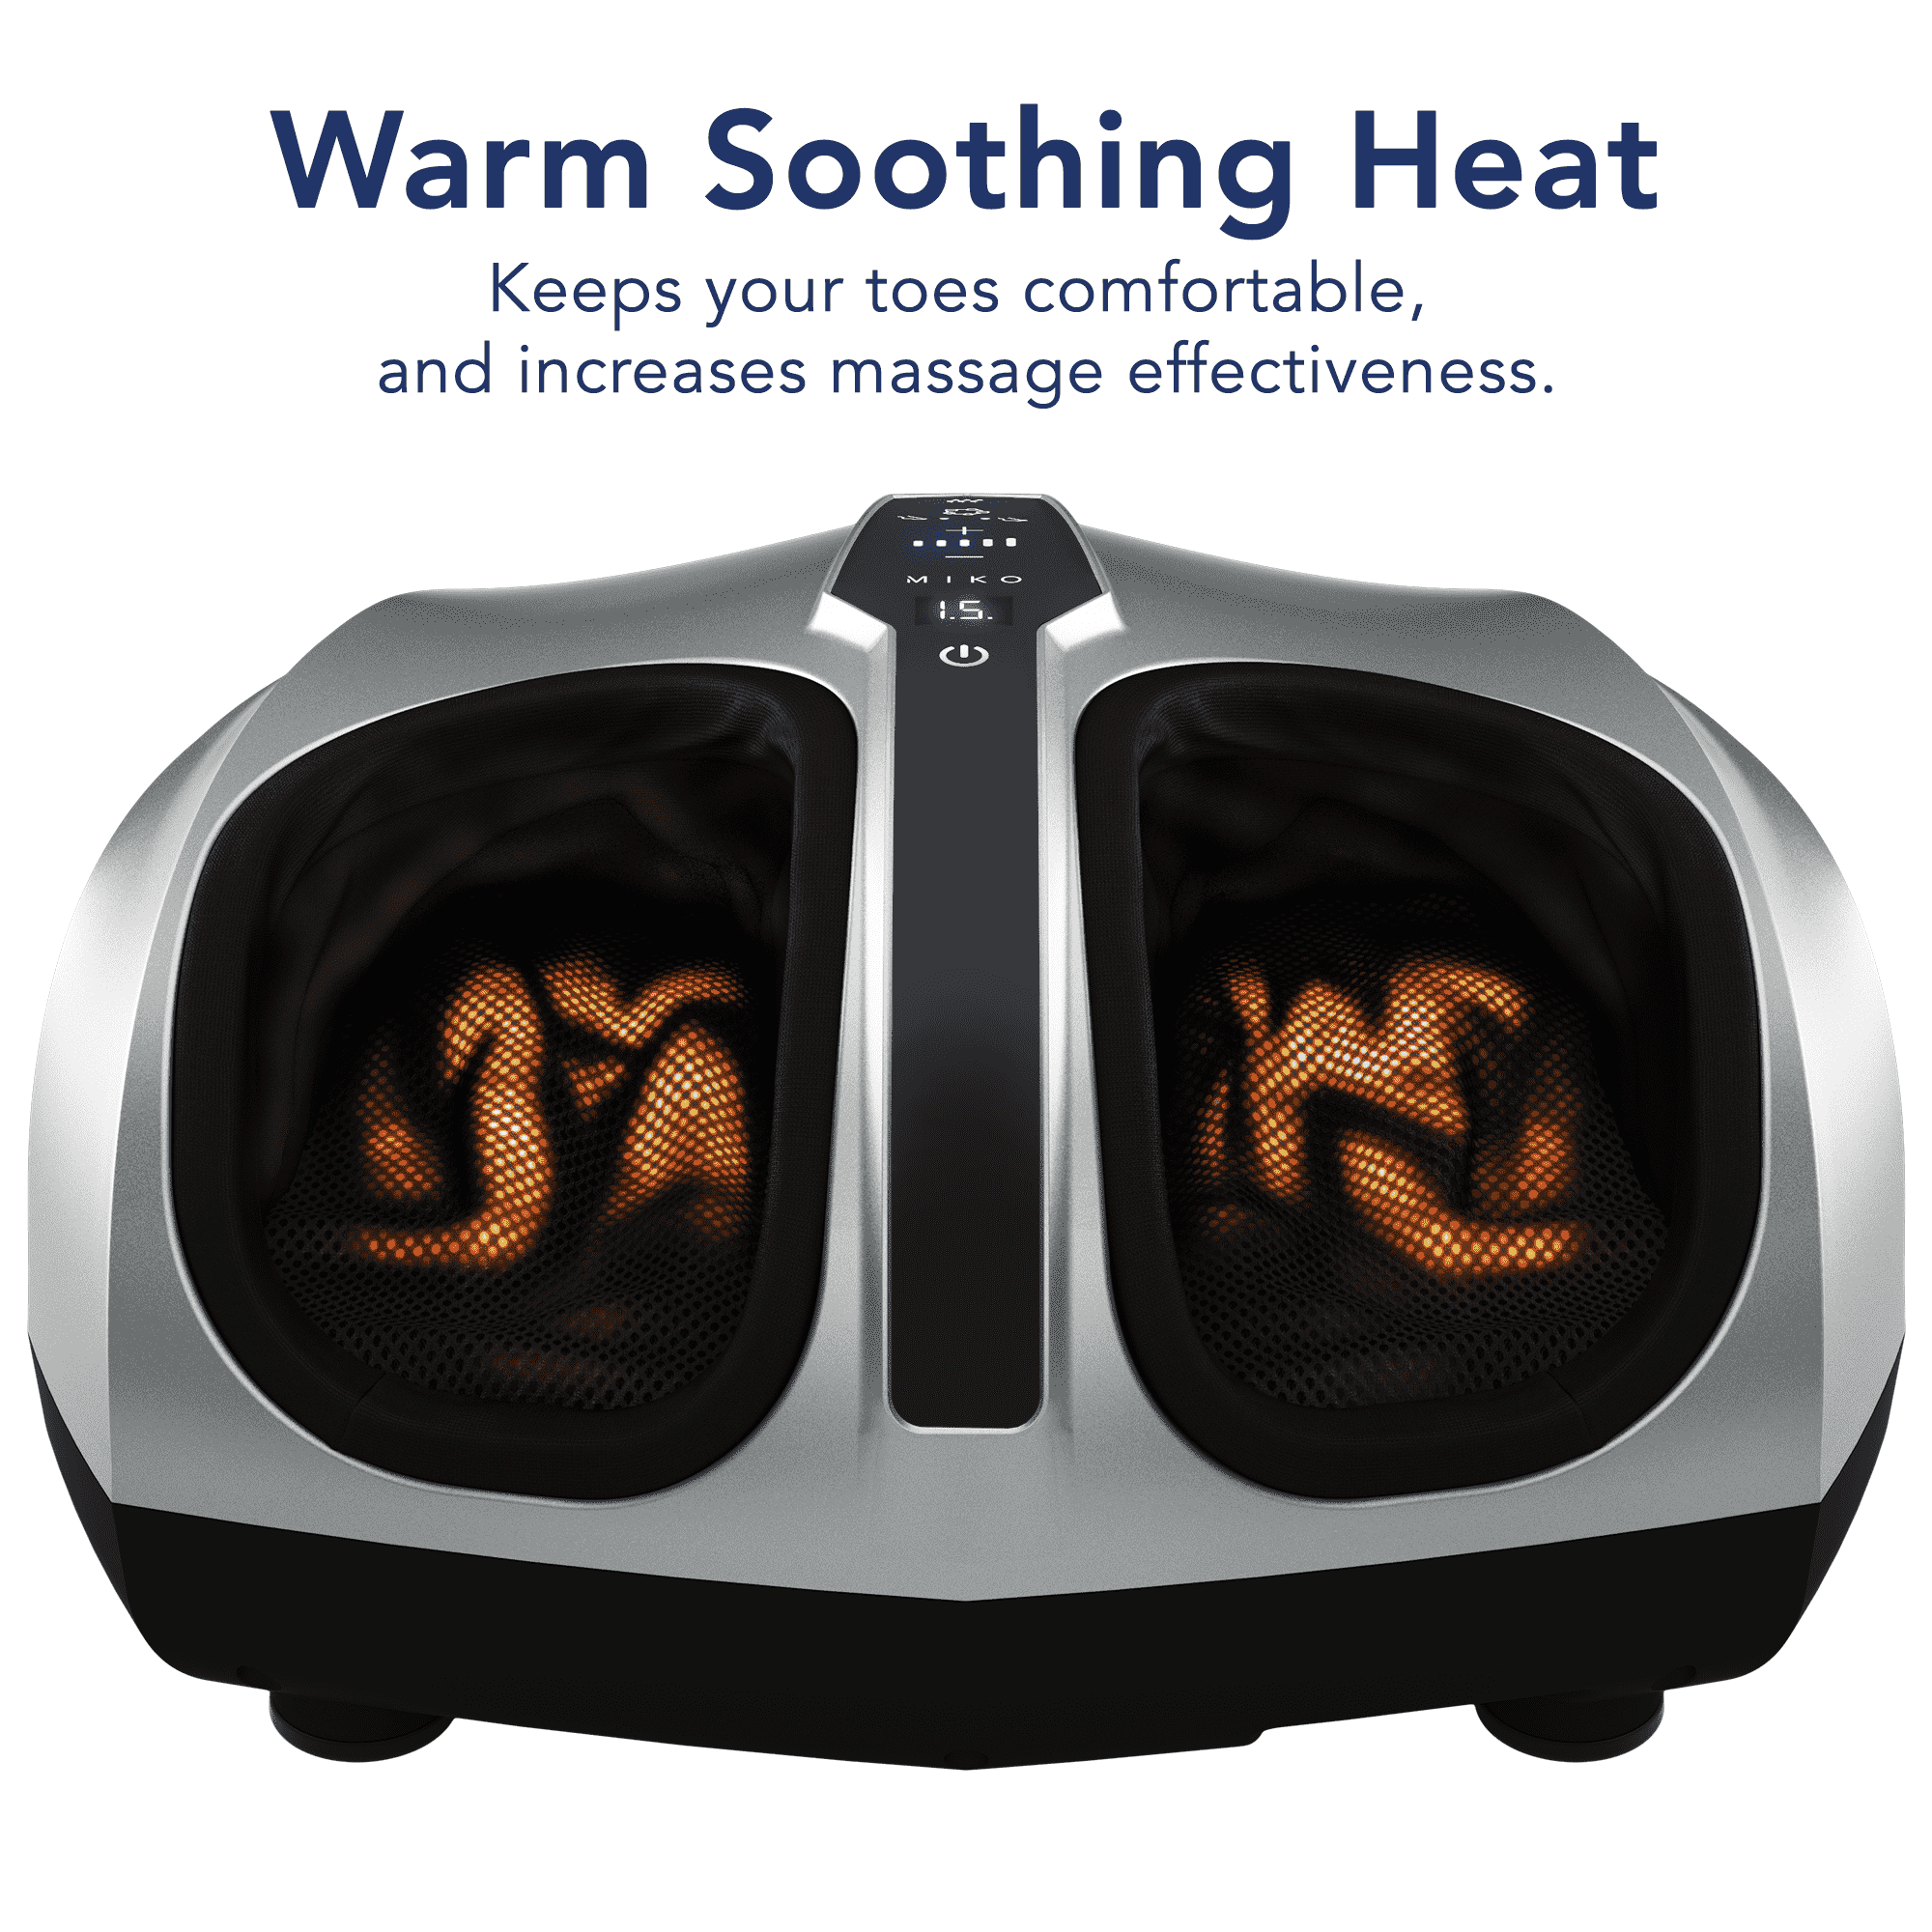 Miko Shiatsu Foot Massager Machine Kneading and Rolling with Heat and Pressure Settings, Silver, Includes 2 Remotes - image 4 of 7